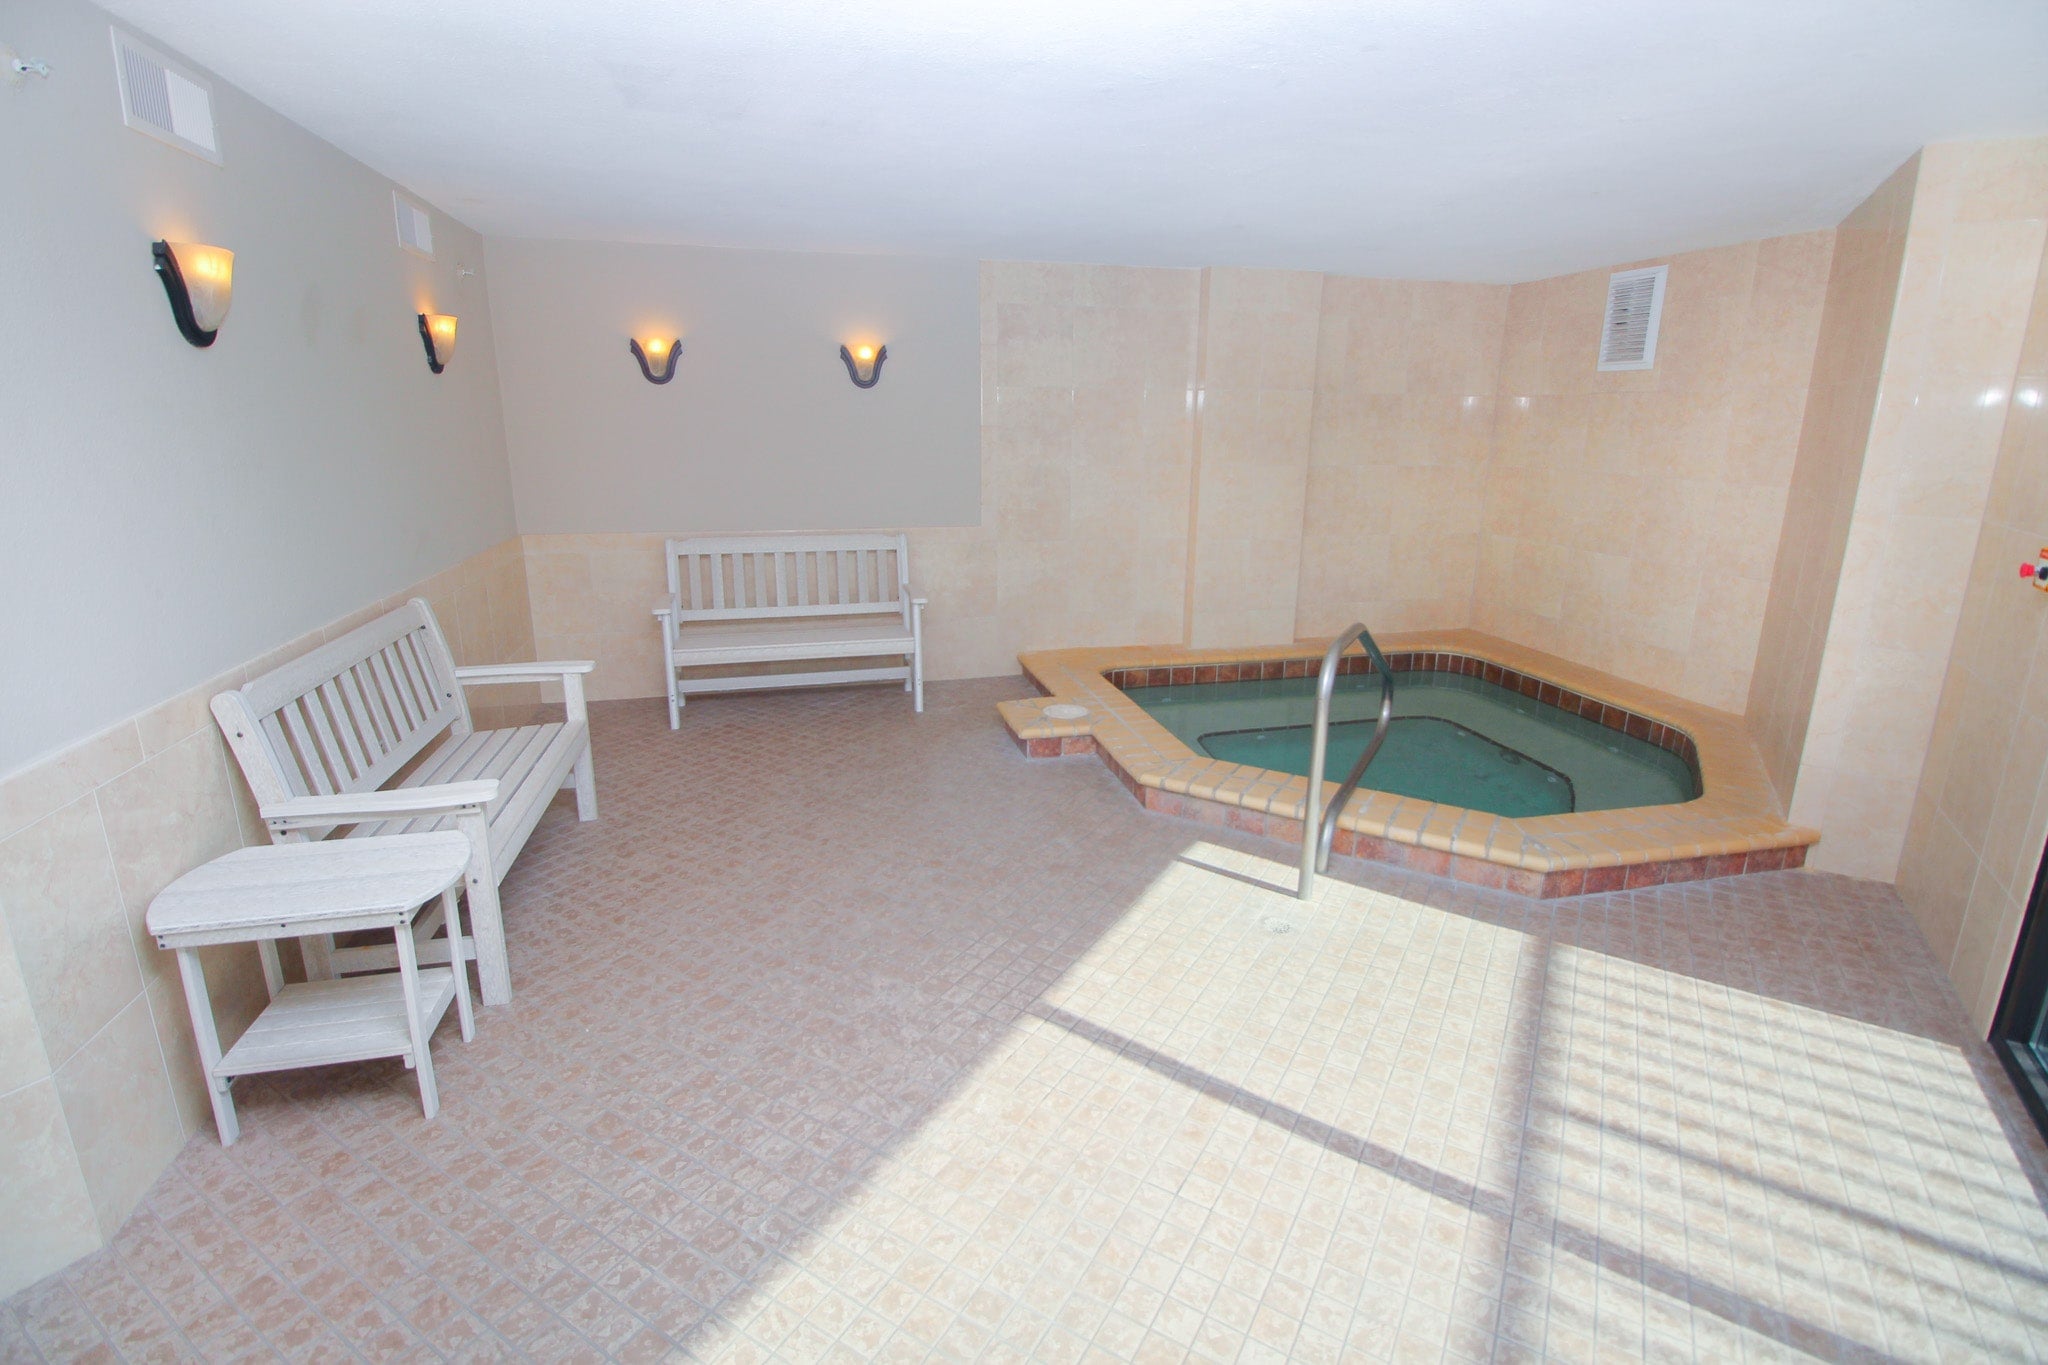 Lounge in the Private Hot Tub Area